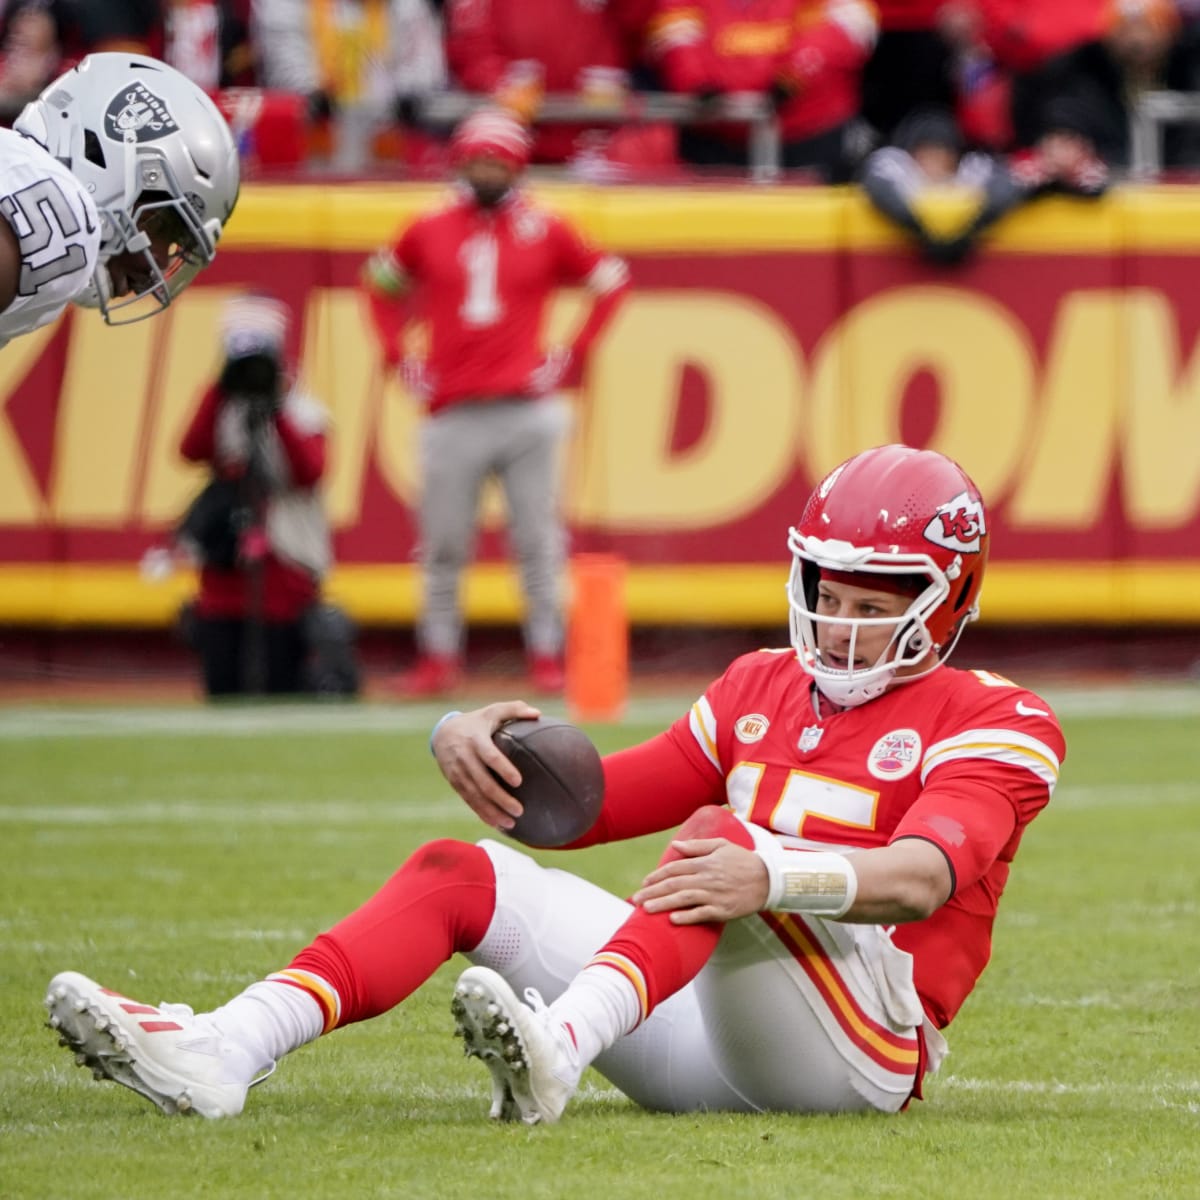 Four Takeaways From the KC Chiefs' 20-14 Loss to the Raiders